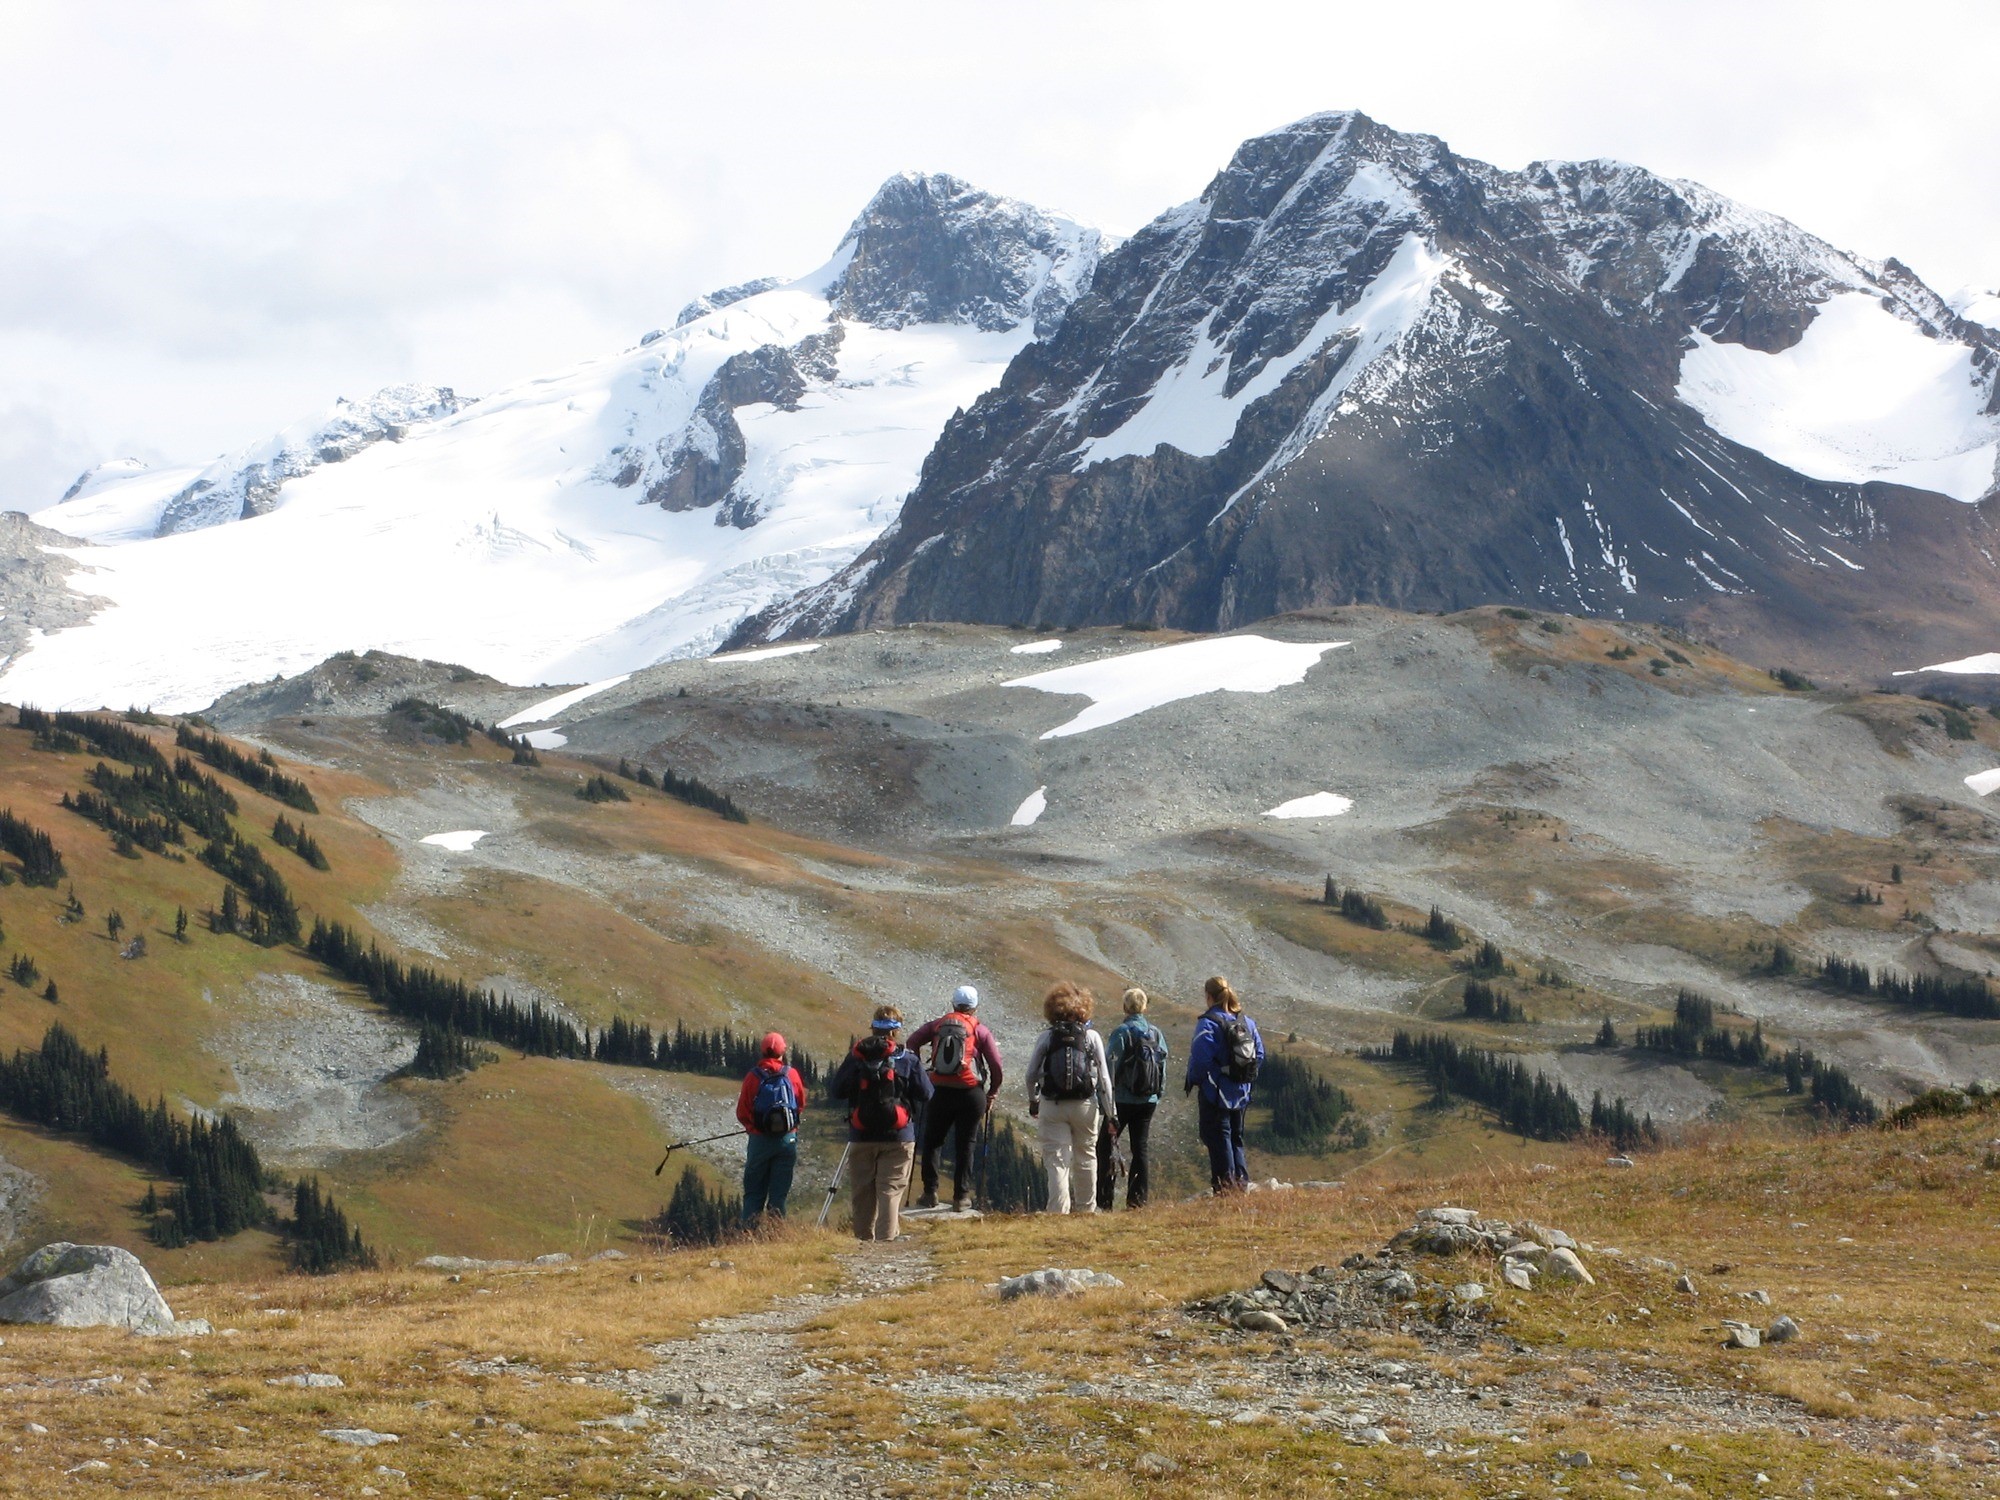 Vancouver Outdoor Club for Women members looking at snow-capped mountains in the distance along Singing Pass in Garibaldi Provincial Park